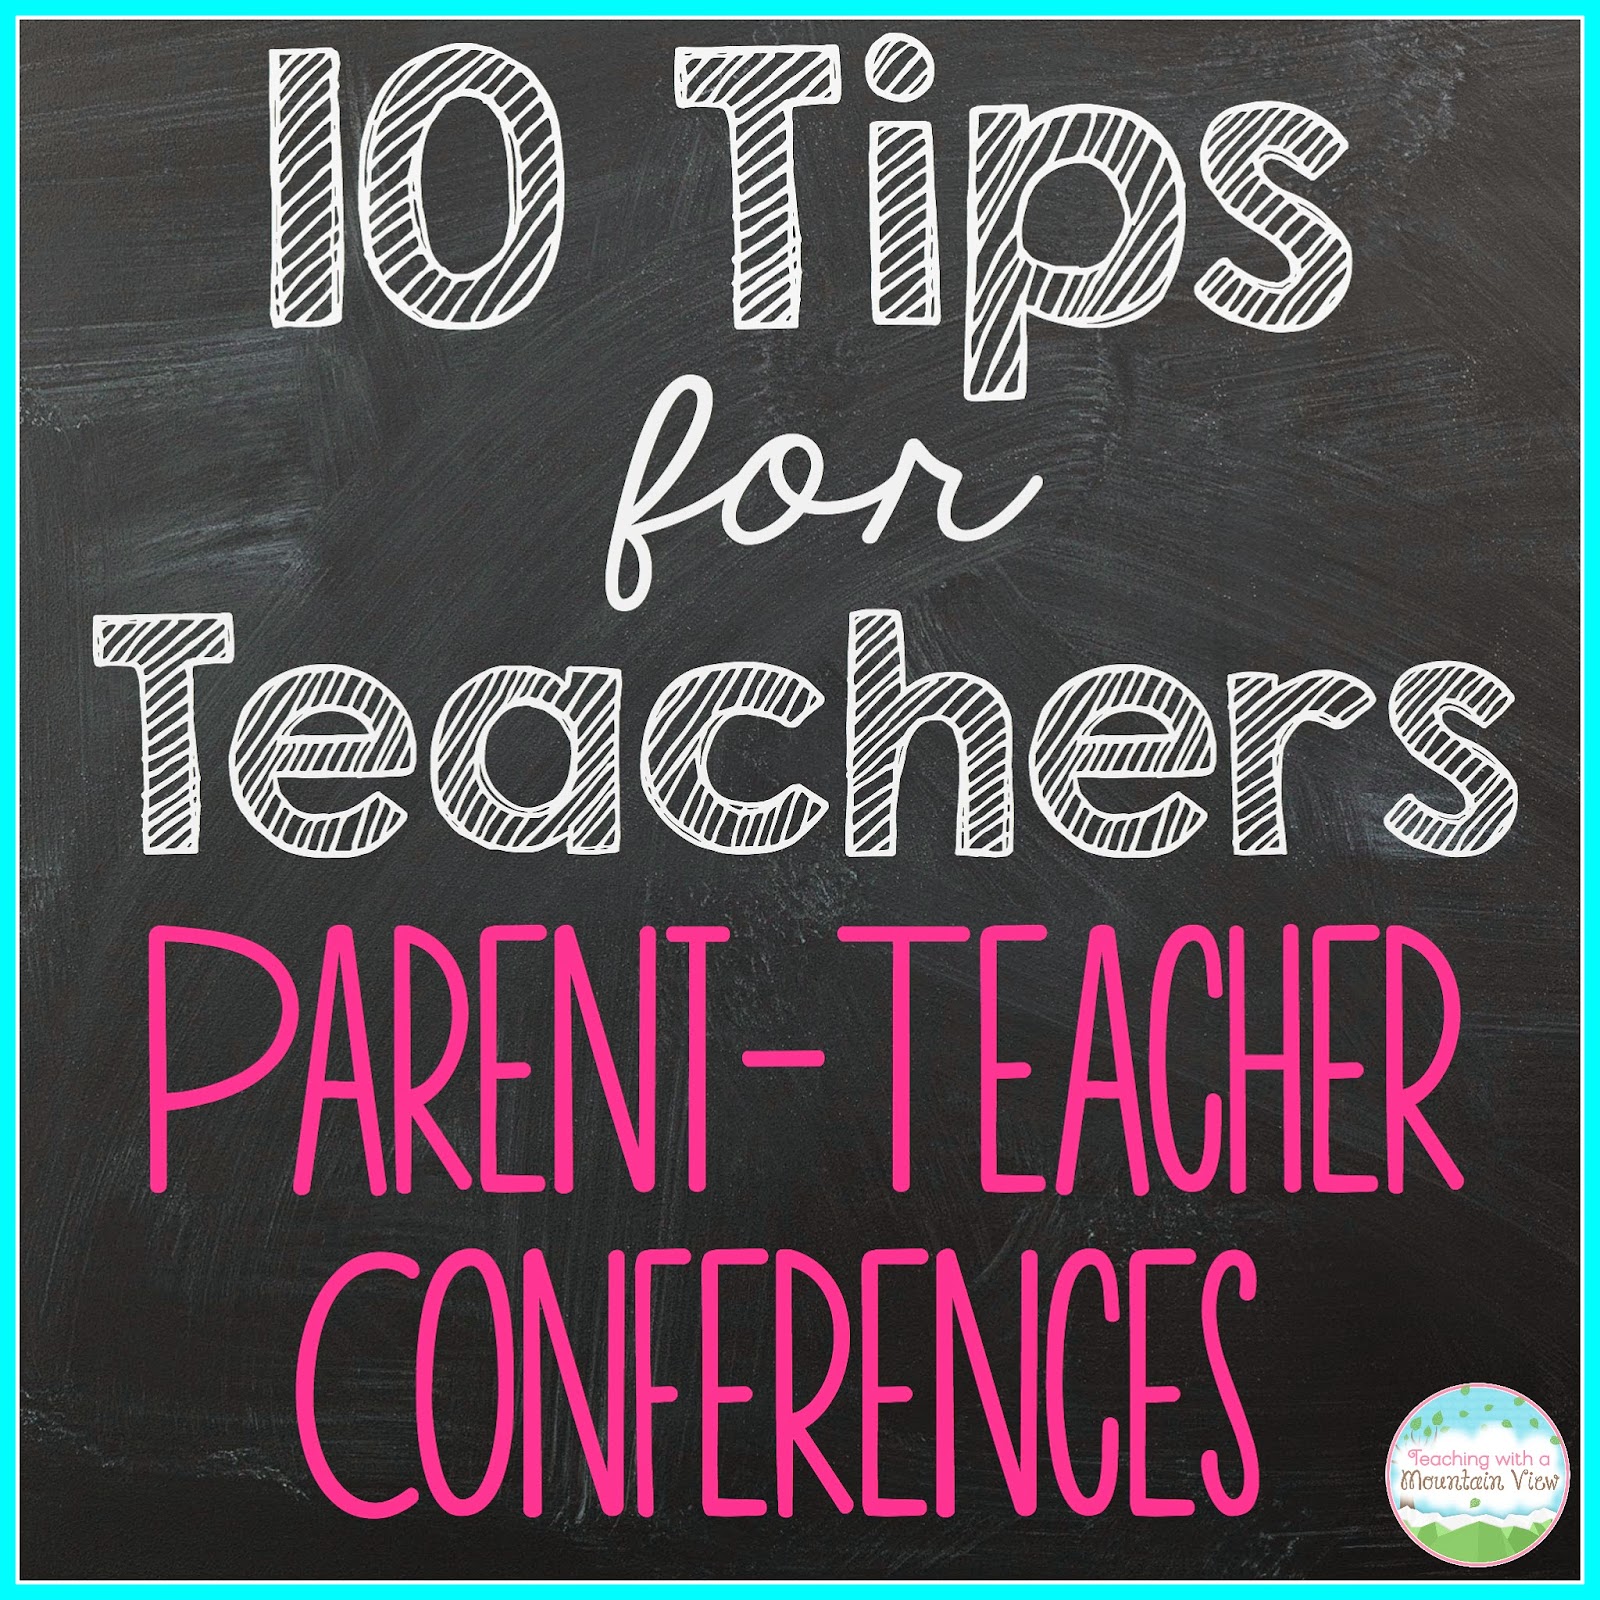 Teaching With a Mountain View: 10 Tips for Smooth Sailing Parent Teacher Conferences